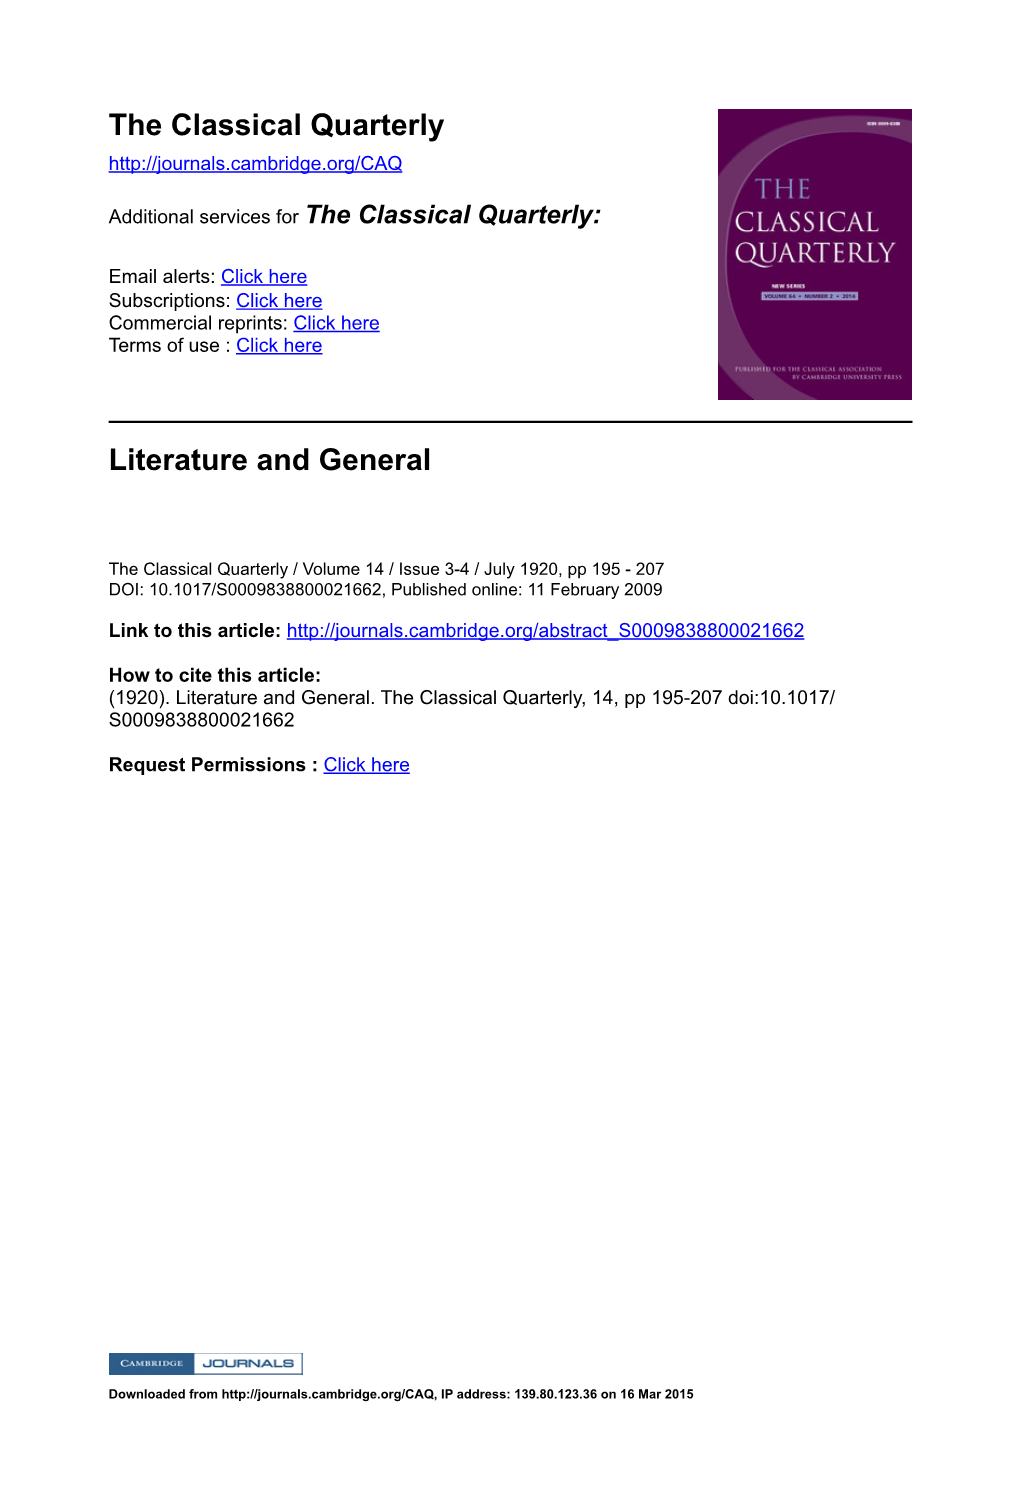 Literature and General